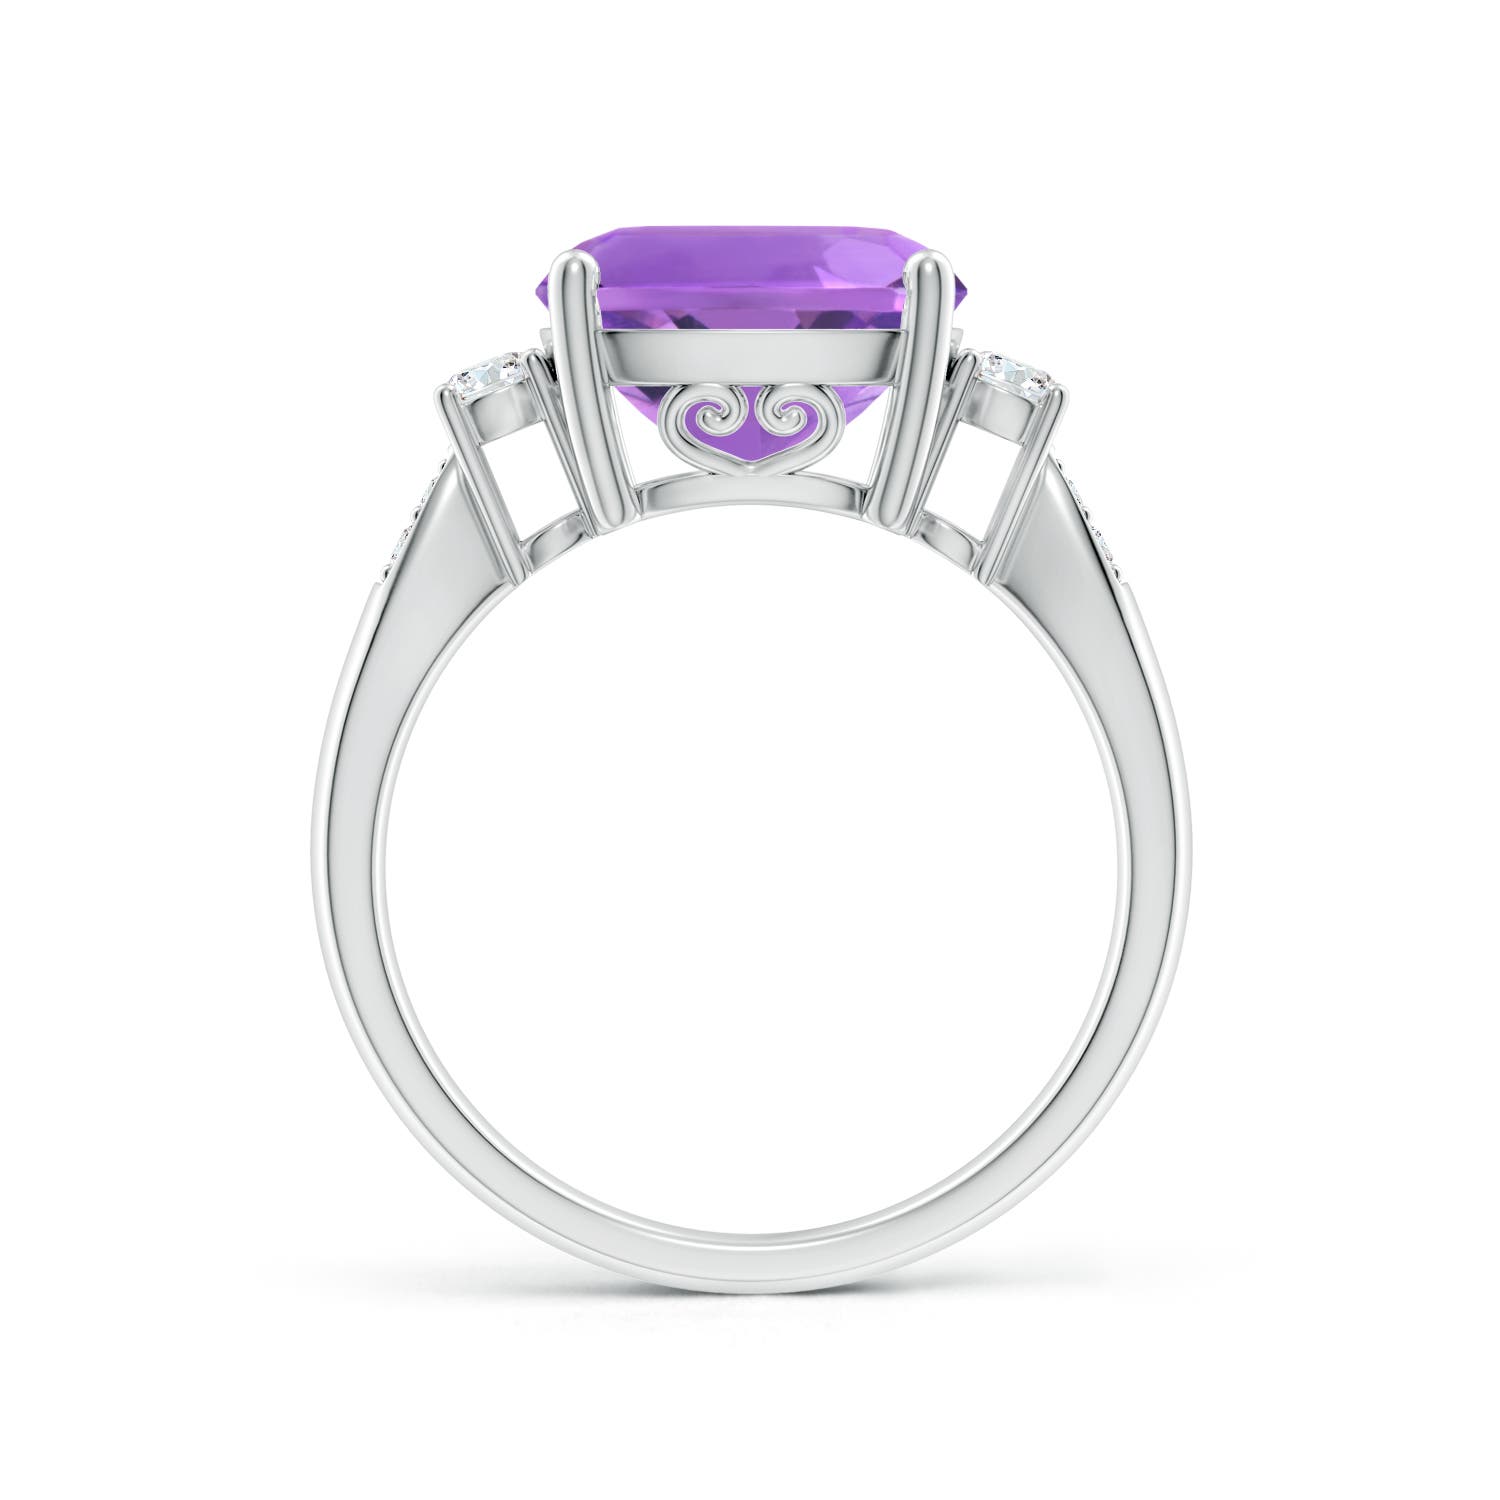 AA - Amethyst / 3.85 CT / 14 KT White Gold